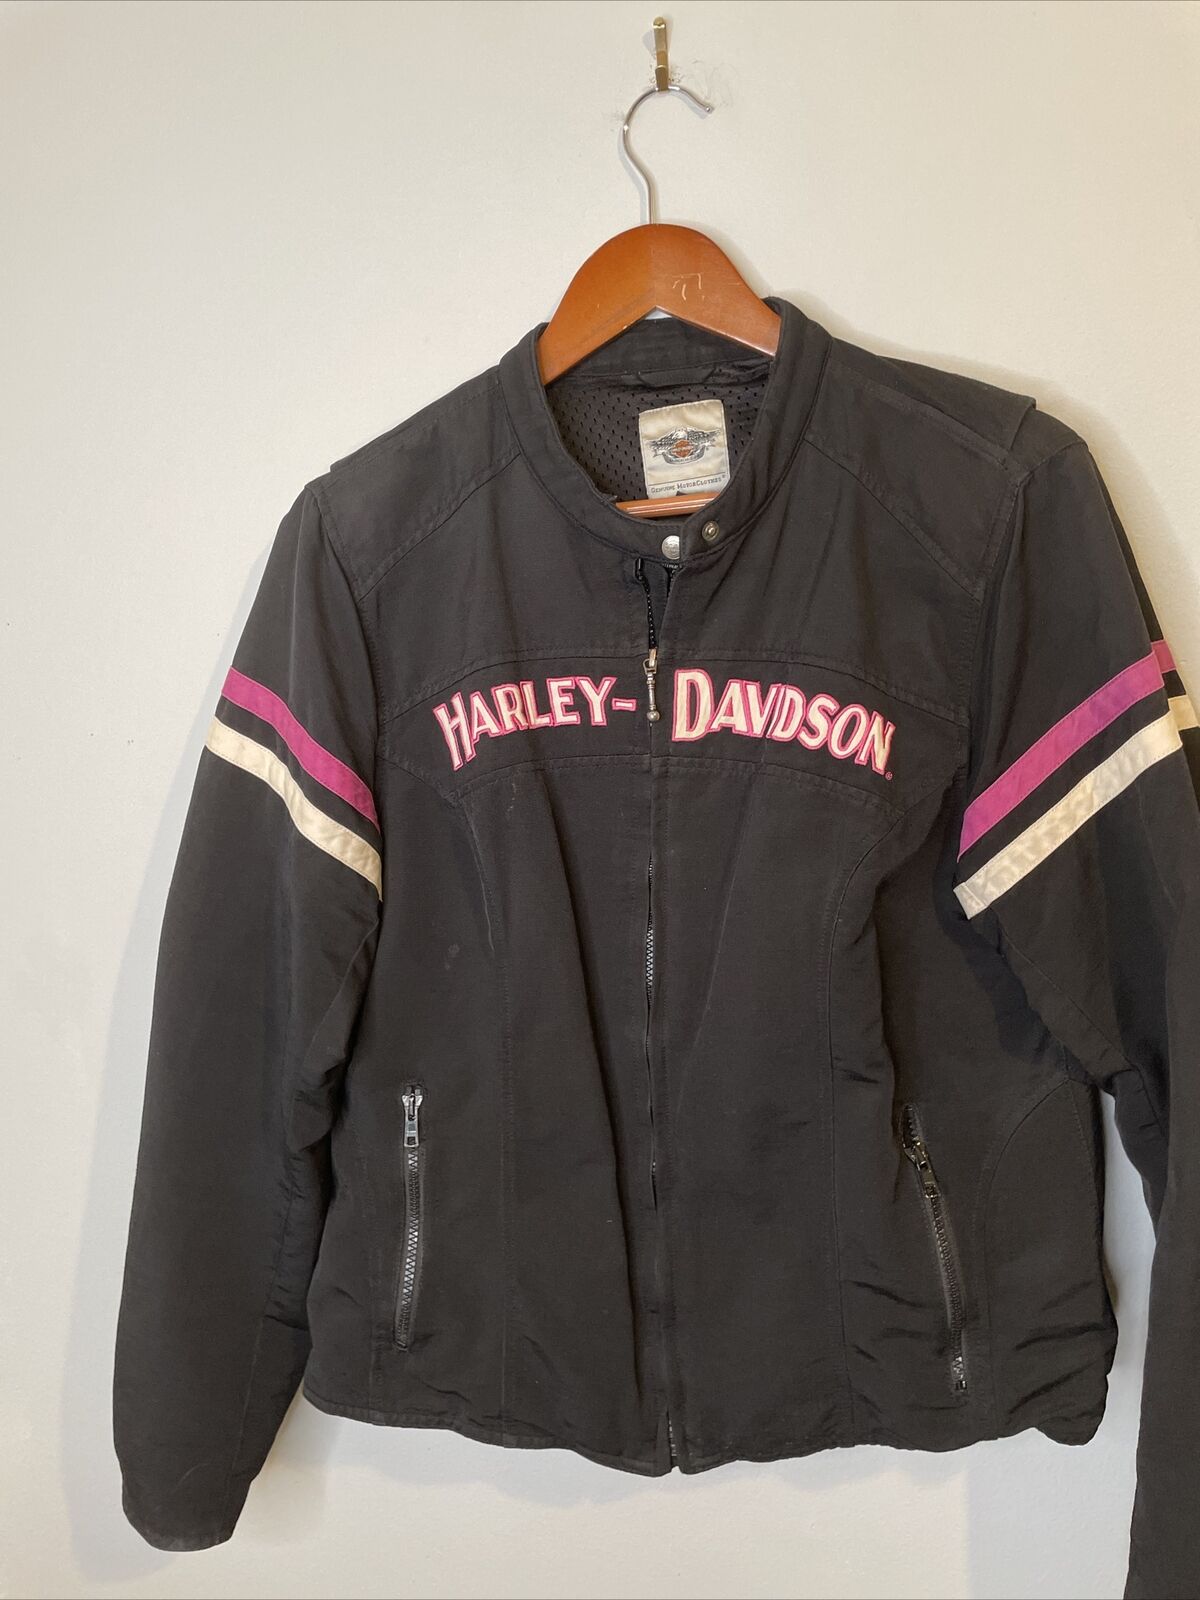 Harley Davidson Women’s Riding Zip Up Sz XL Jacket Cotton poly Lined Pink white